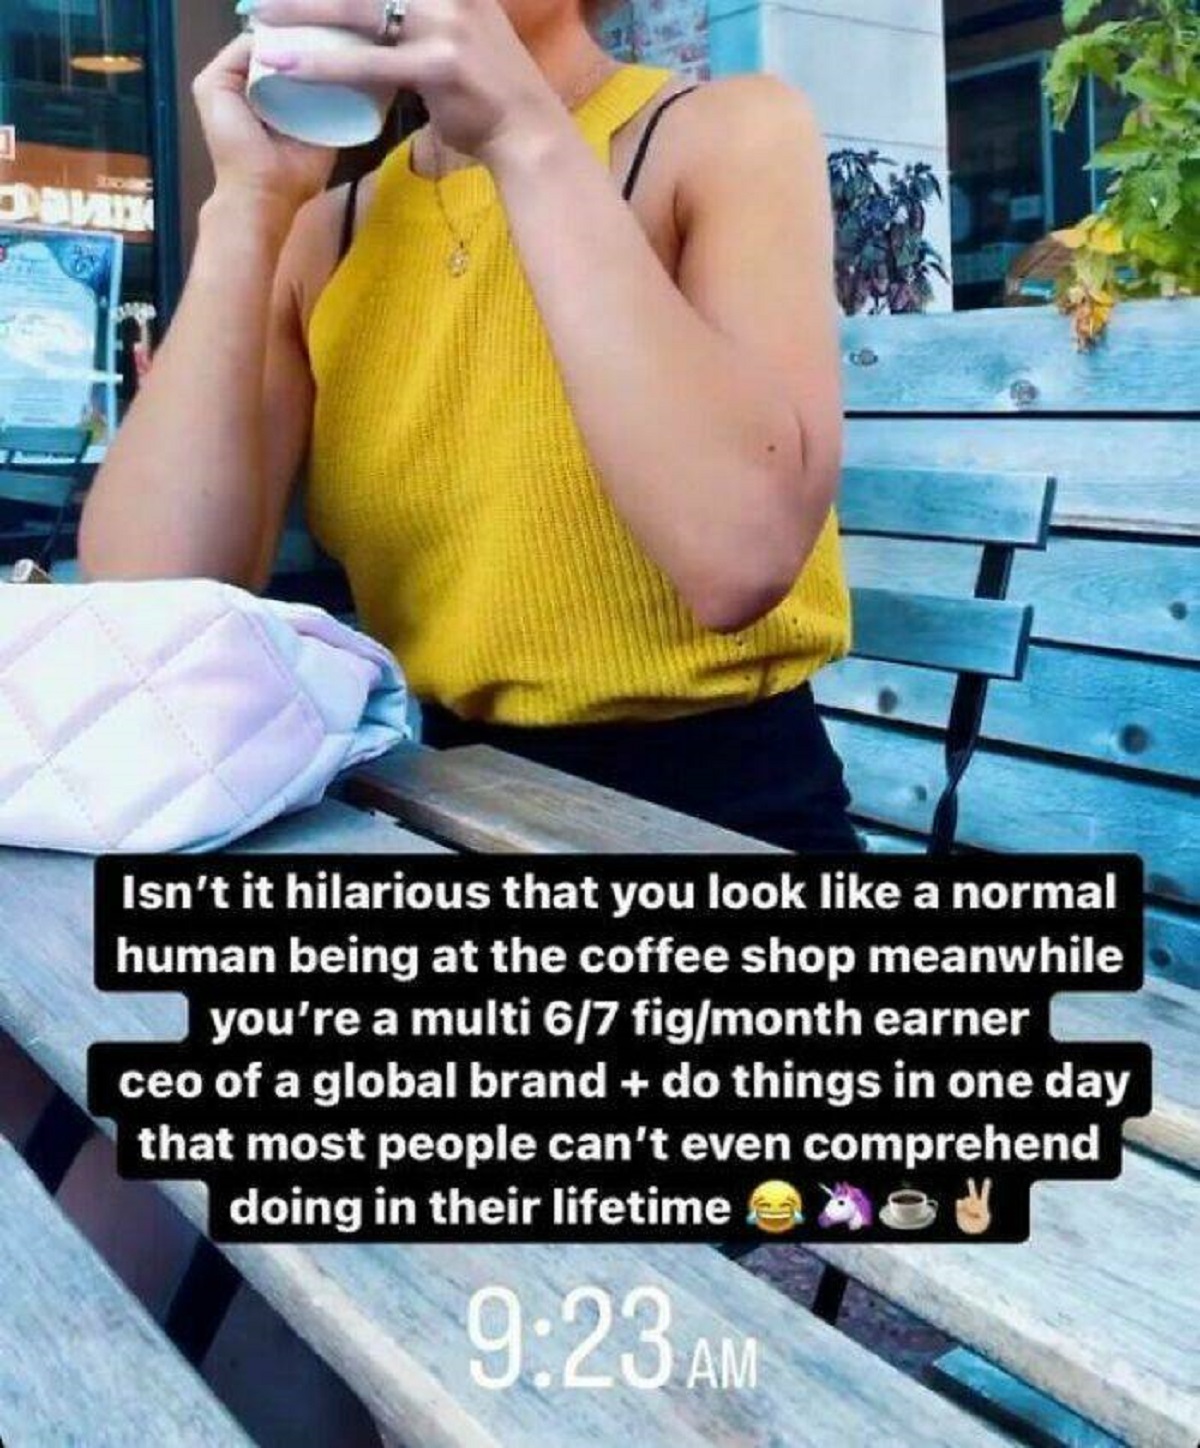 ppl main character syndrome - Isn't it hilarious that you look a normal human being at the coffee shop meanwhile you're a multi 67 figmonth earner ceo of a global brand do things in one day that most people can't even comprehend doing in their lifetime